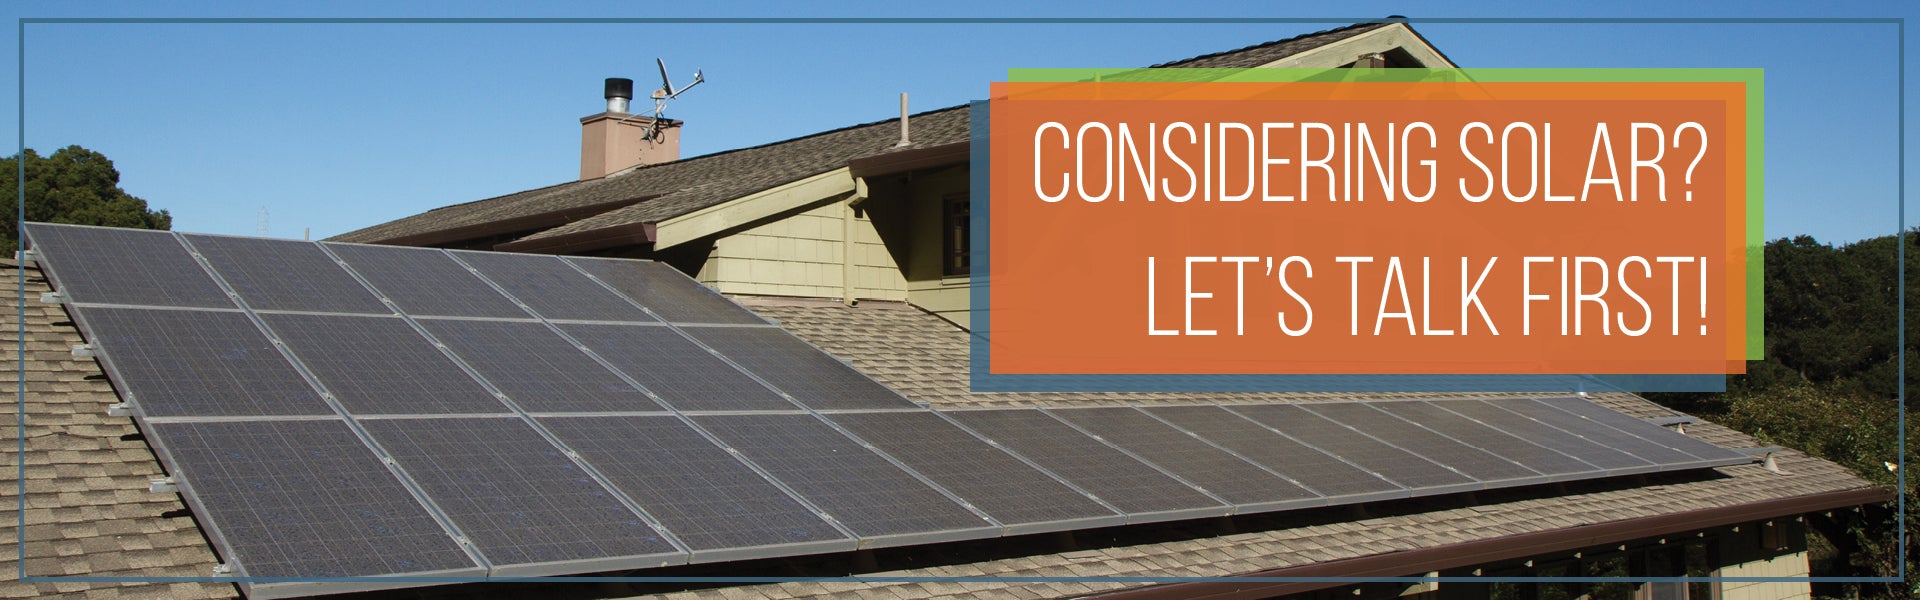 Considering solar? Let's talk first! Image of solar panels on a home. 